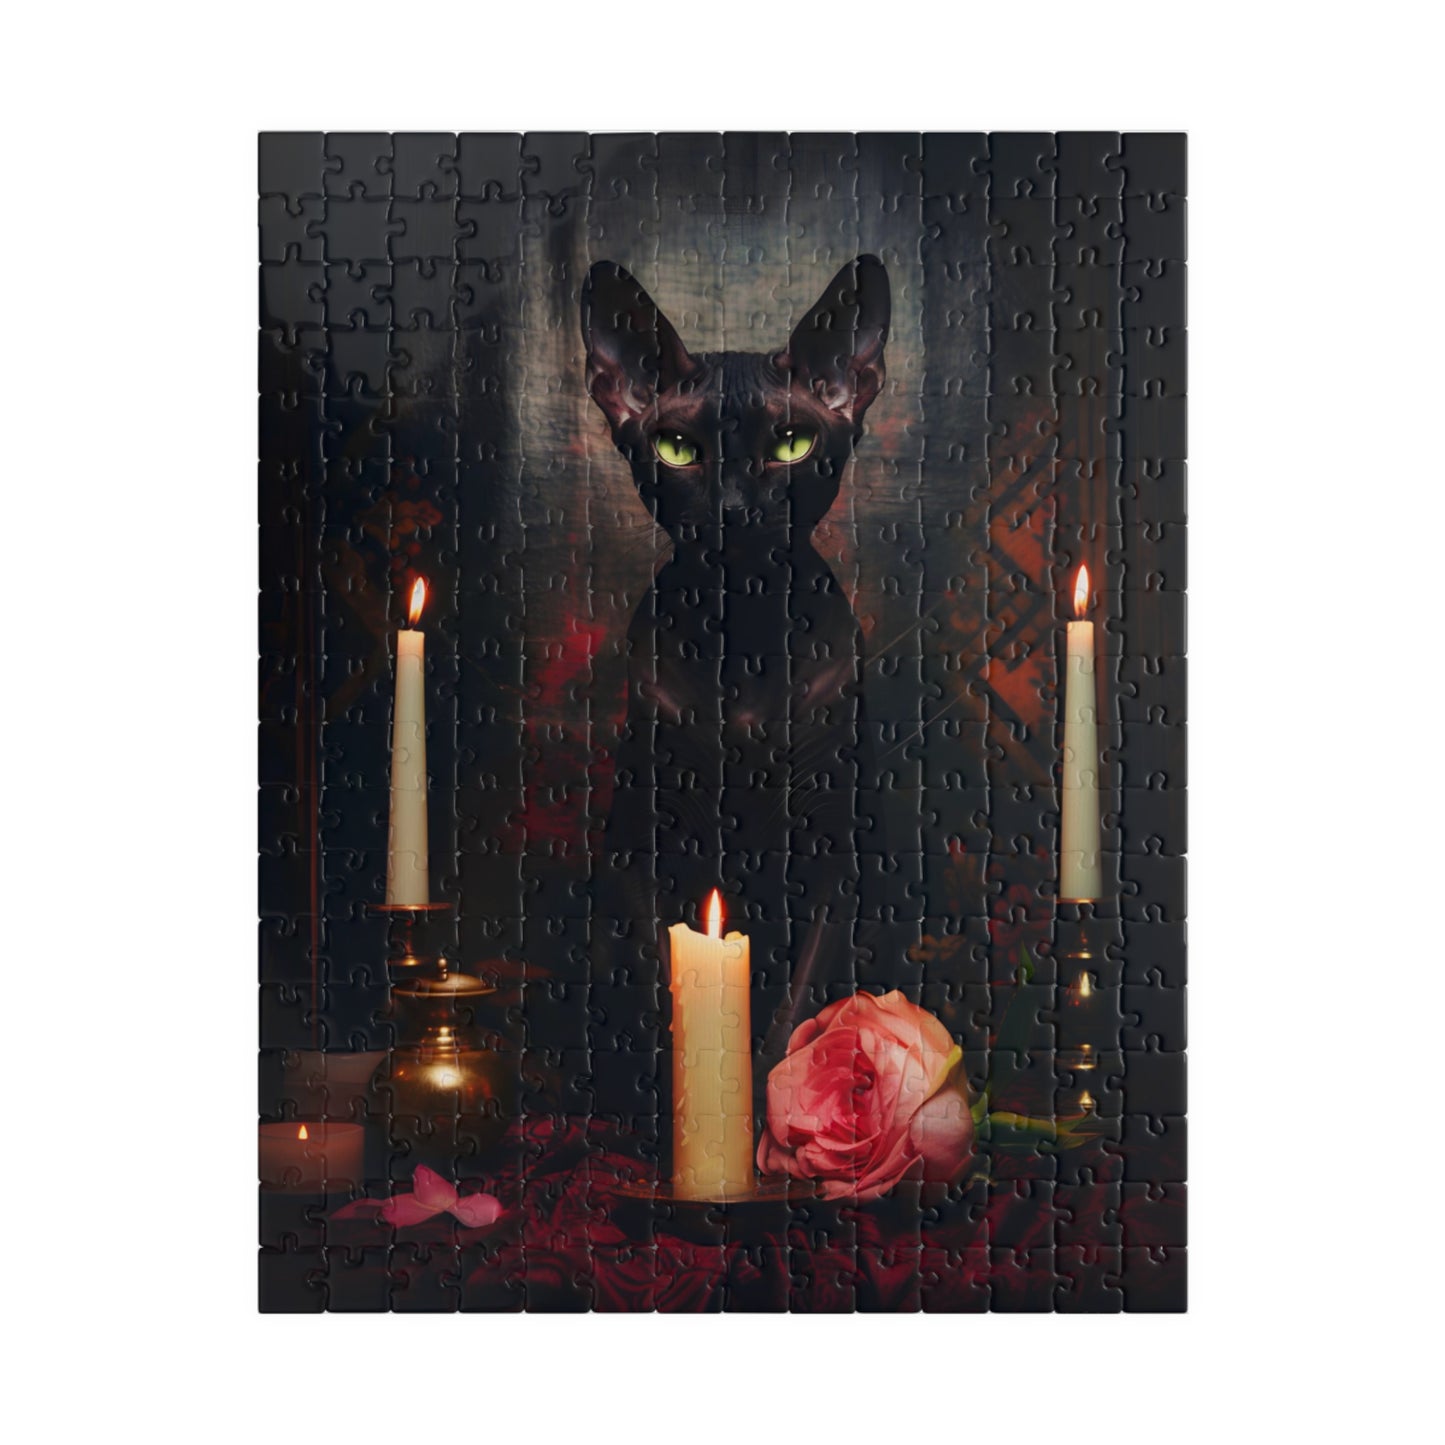 Velvety Black Sphynx with Candles | Jigsaw Puzzle